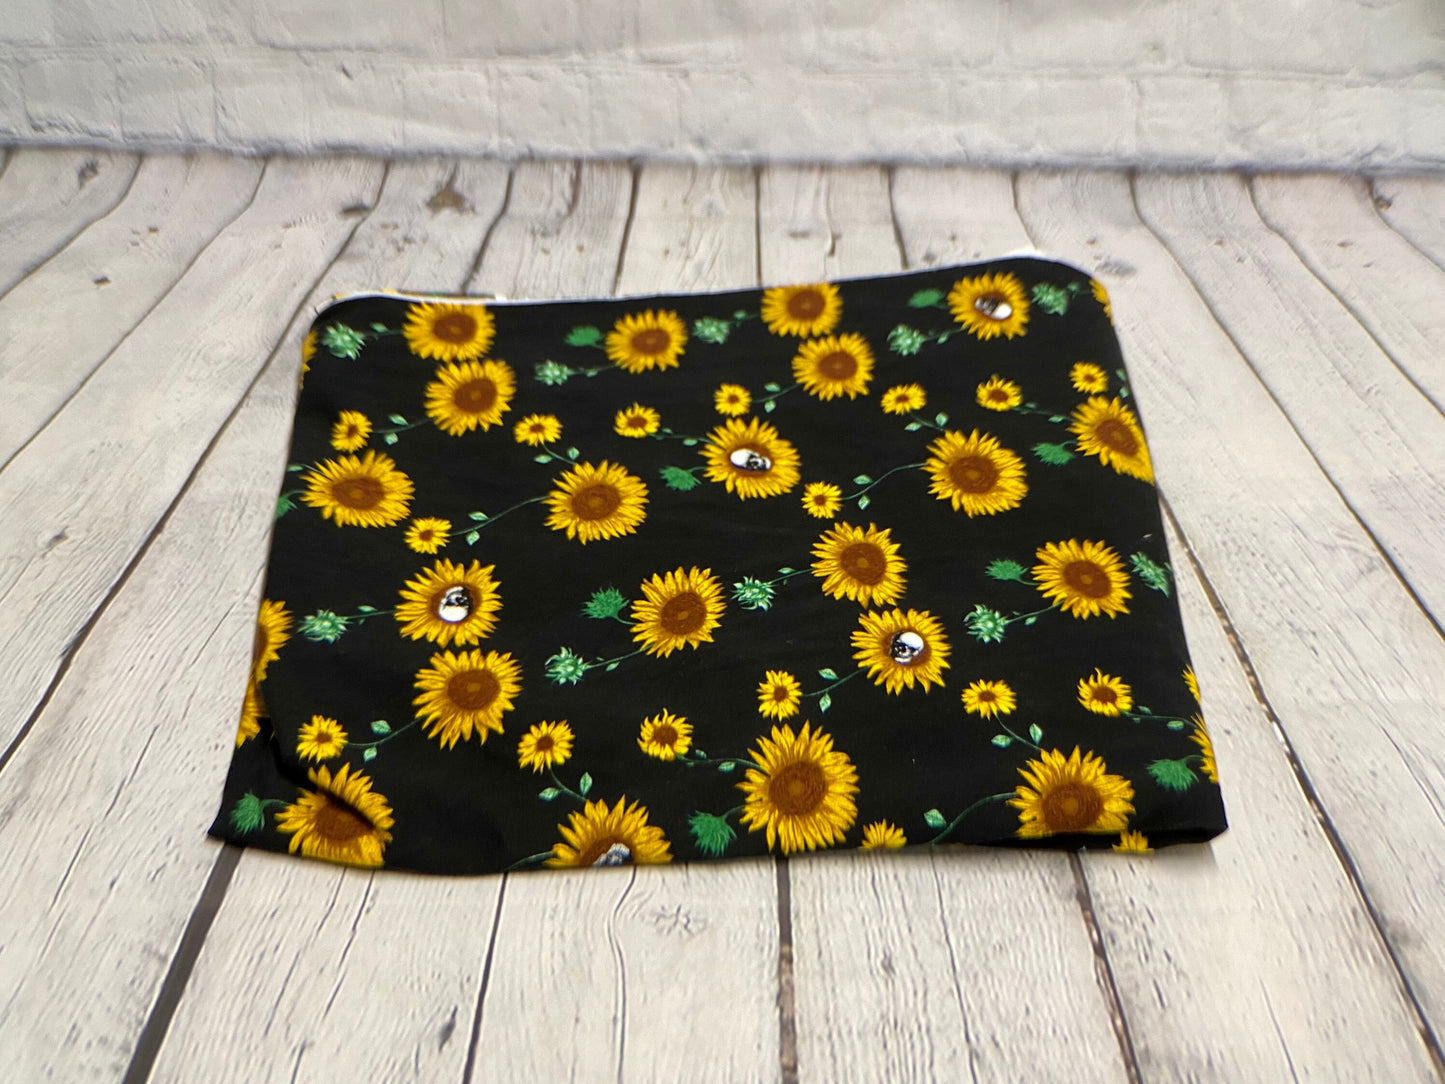 Heavy Weight Cotton Spandex 4 Way Stretch Sunflower Skull Gothic Print Fabric By The Yard 240 GSM